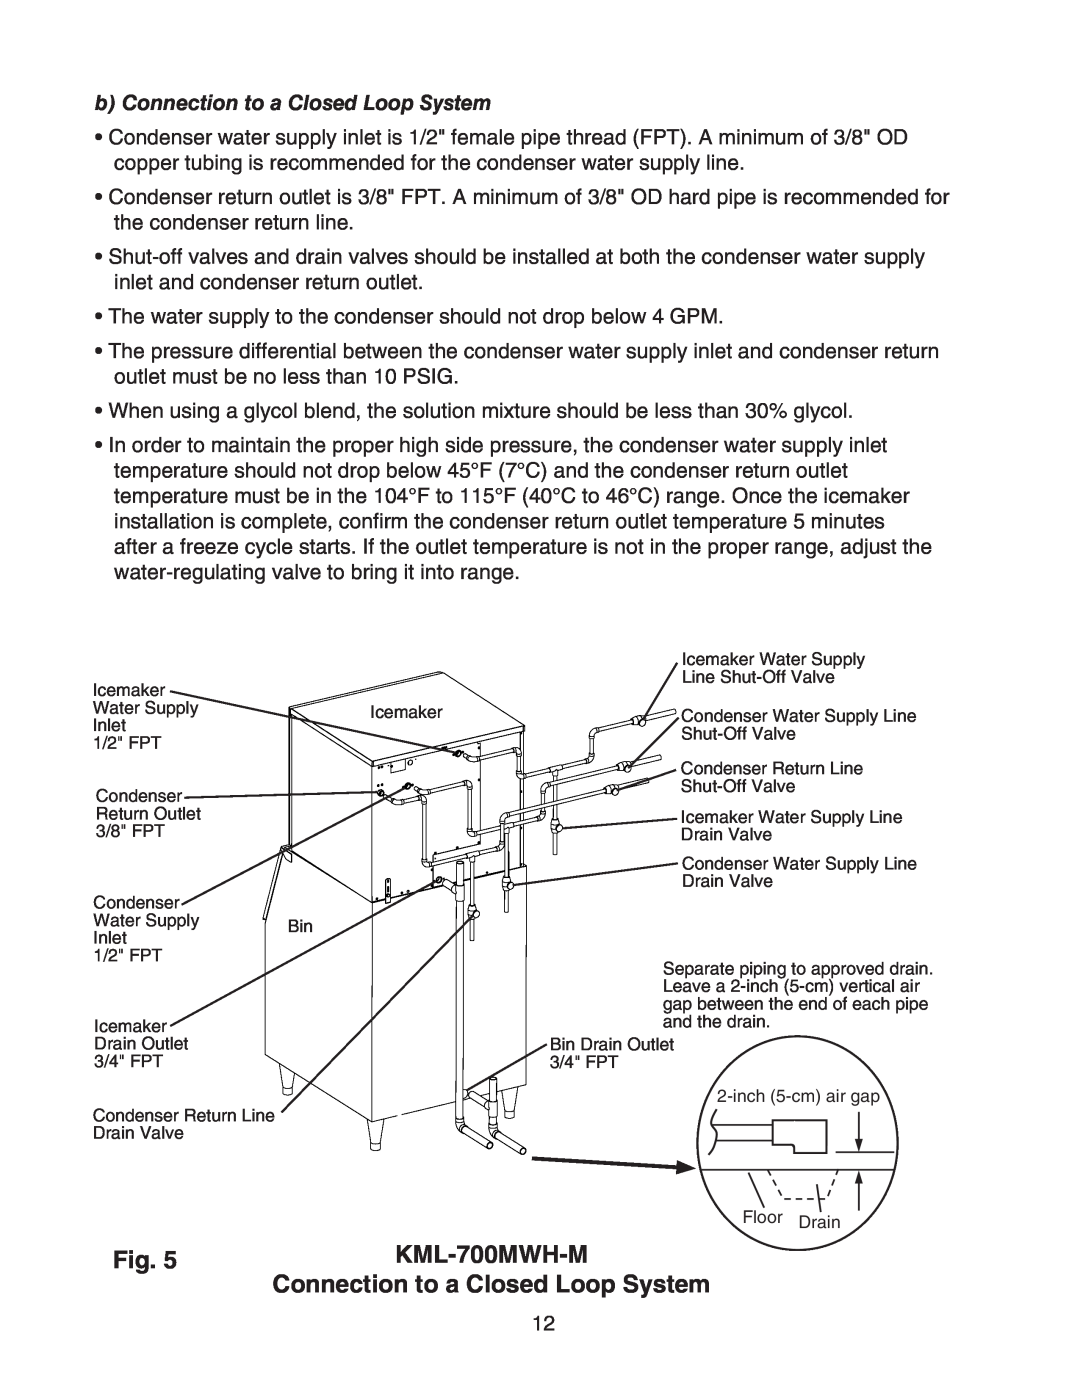 Hoshizaki KML-700MWH-M instruction manual b Connection to a Closed Loop System, Fig 